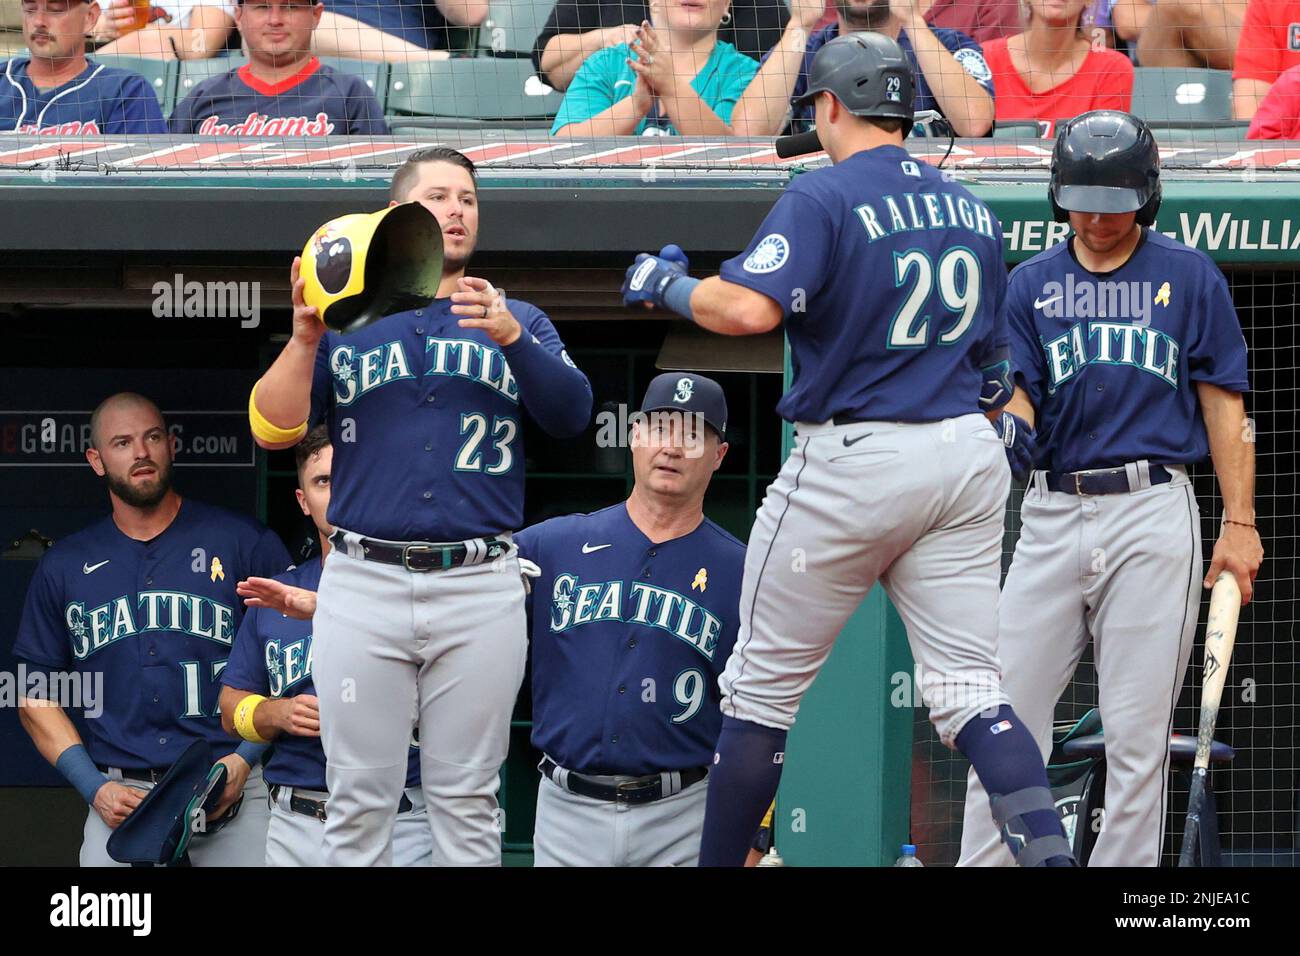 CLEVELAND, OH - SEPTEMBER 02: Seattle Mariners first baseman Ty France (23)  waits to put the home run helmet on Seattle Mariners catcher Cal Raleigh  (29) after Raleigh hit a home run